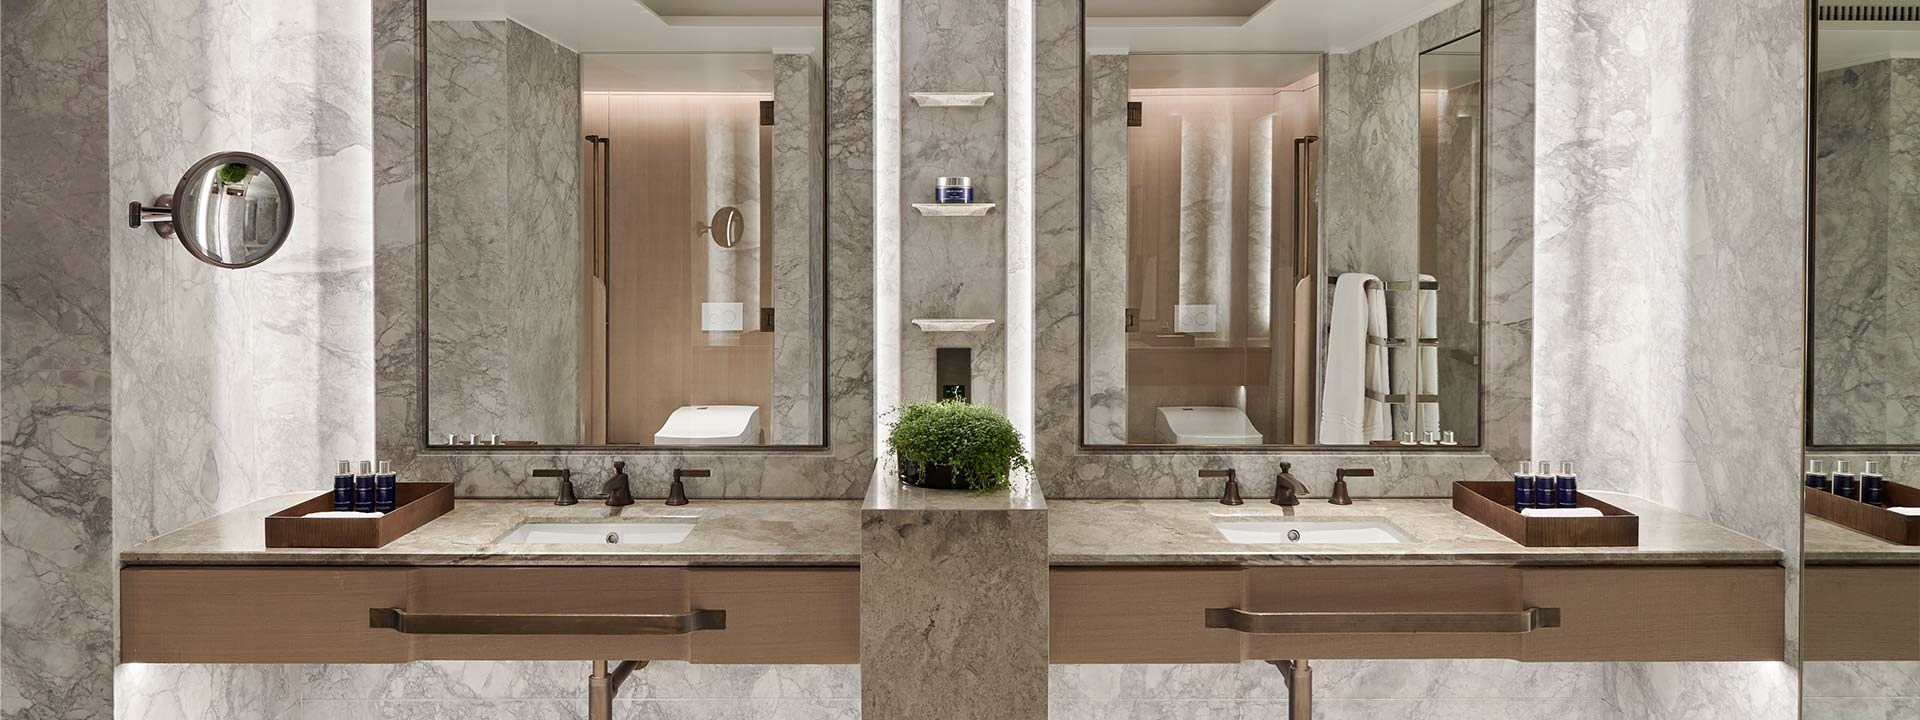 Grand Pavilion Terrace at The Berkeley - bathroom view with marble bath sinks and mirrors on the wall.